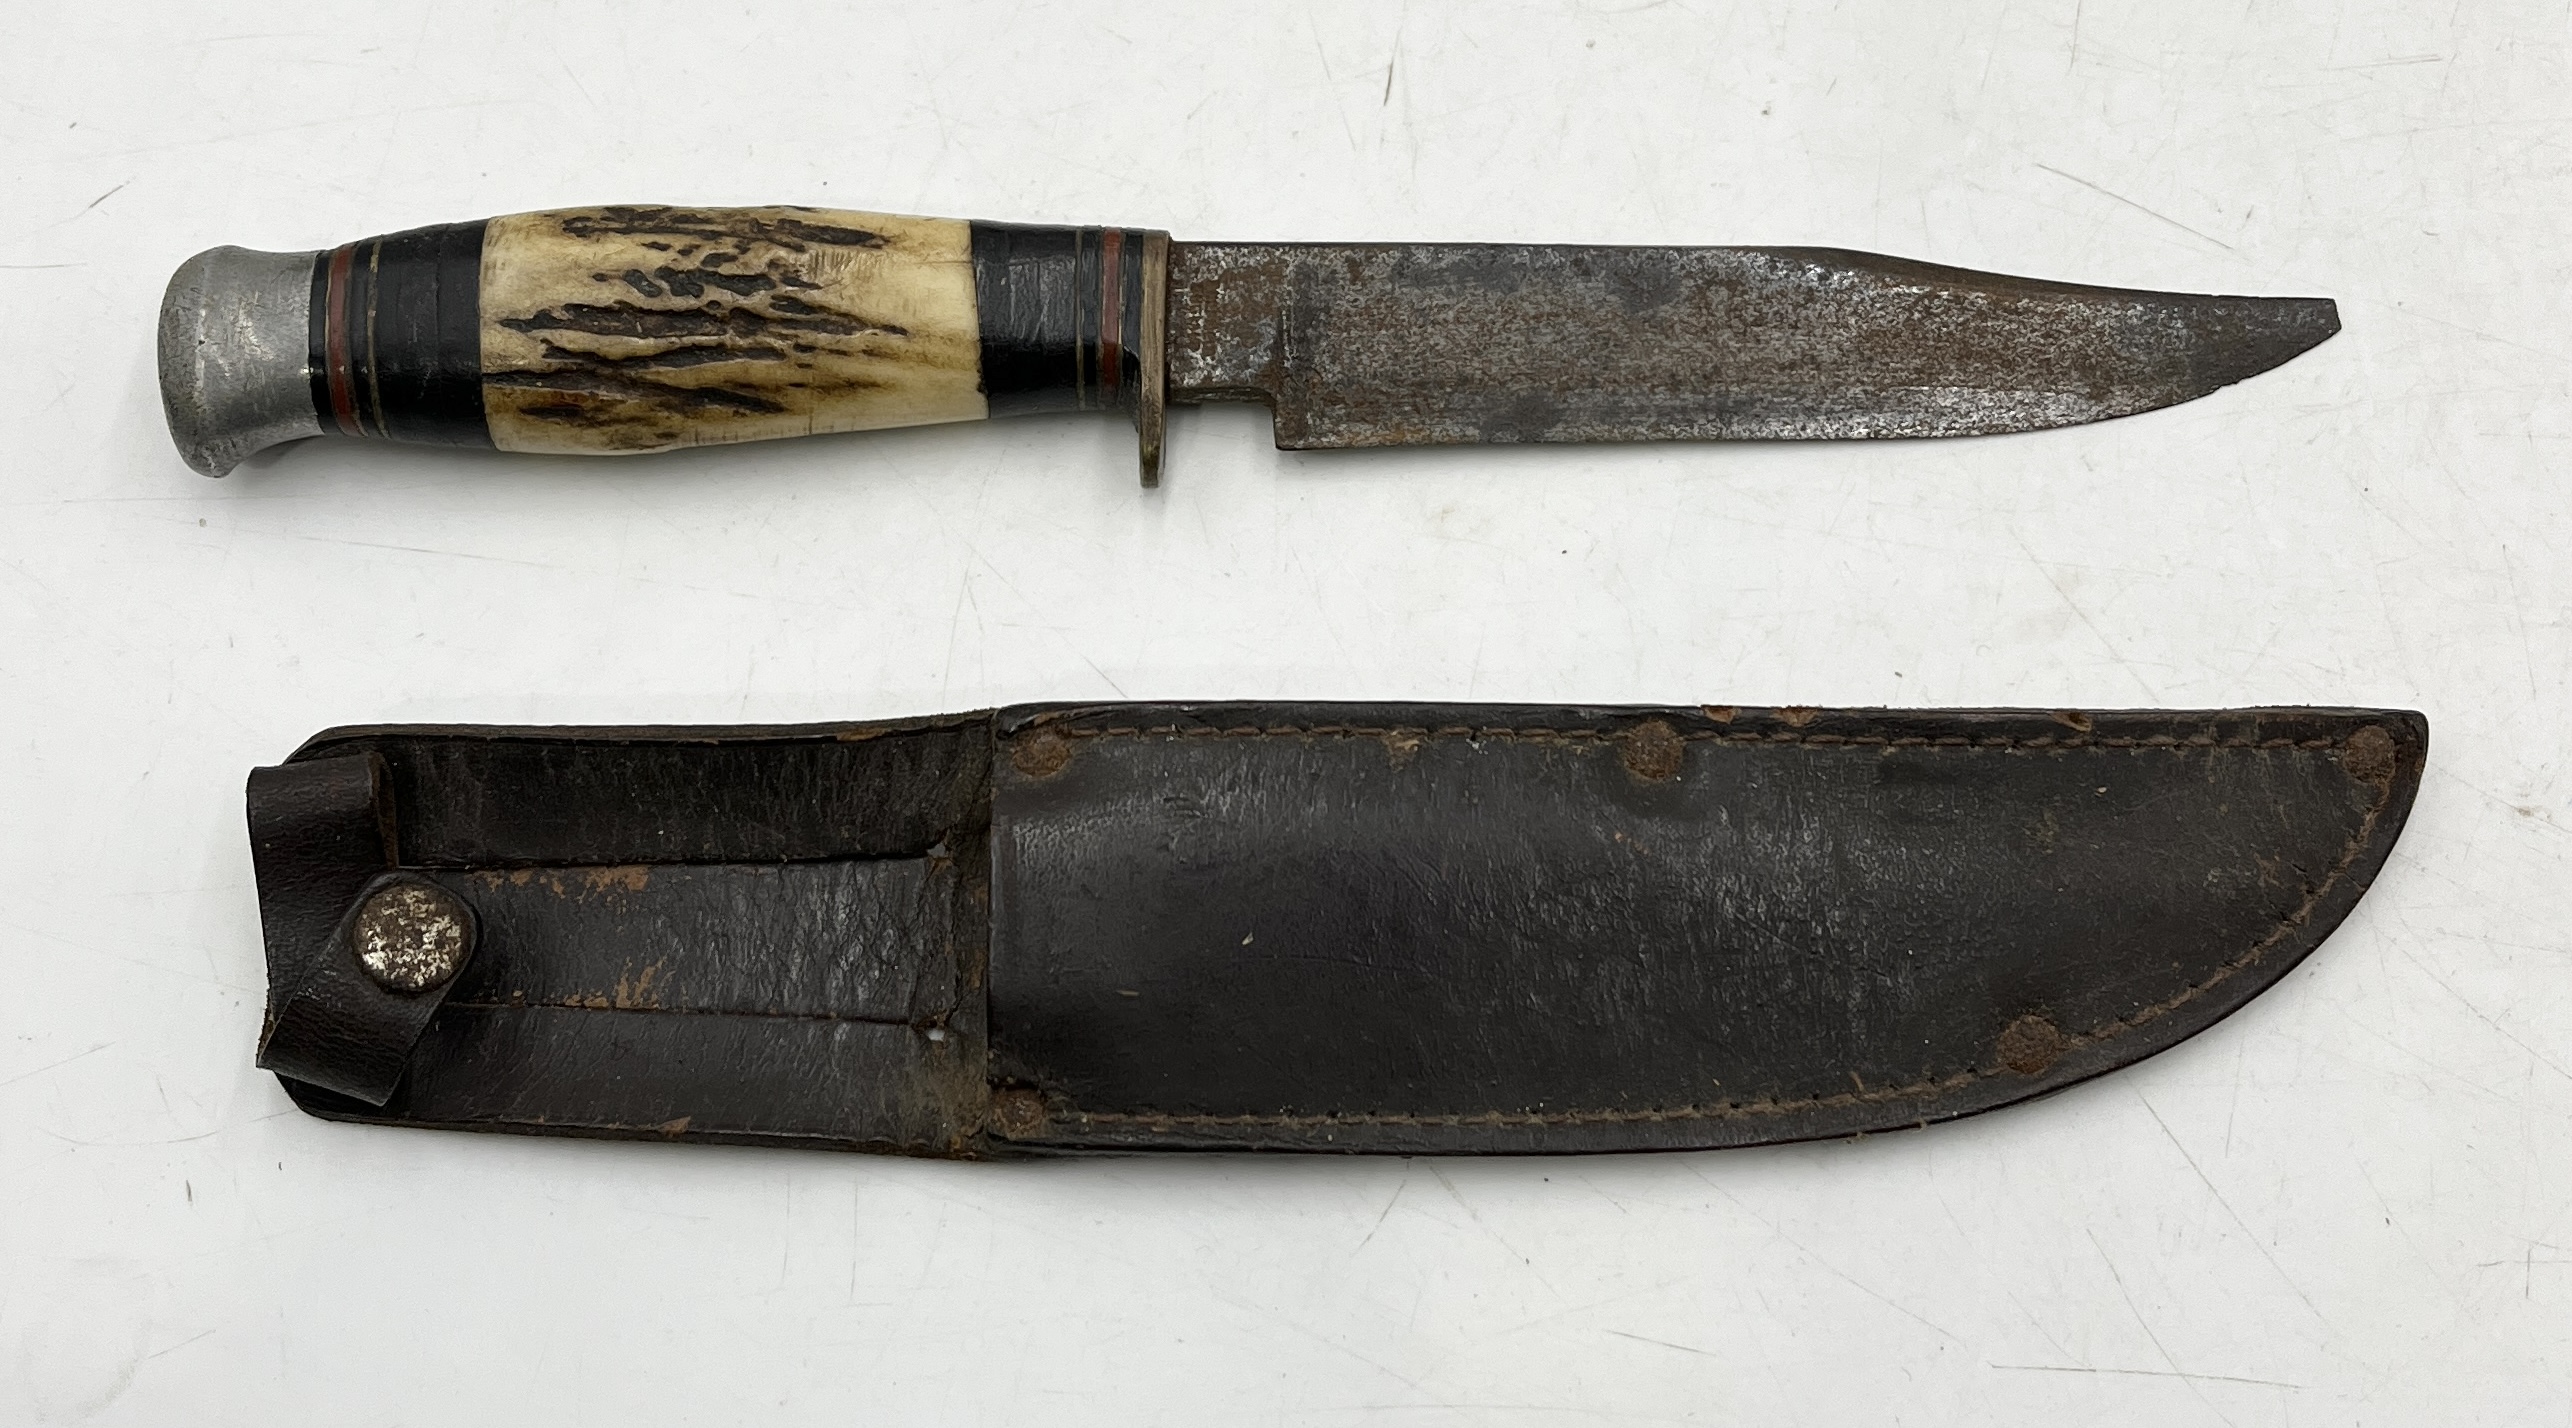 A William Rodgers bone handled hunting knife with leather sheath